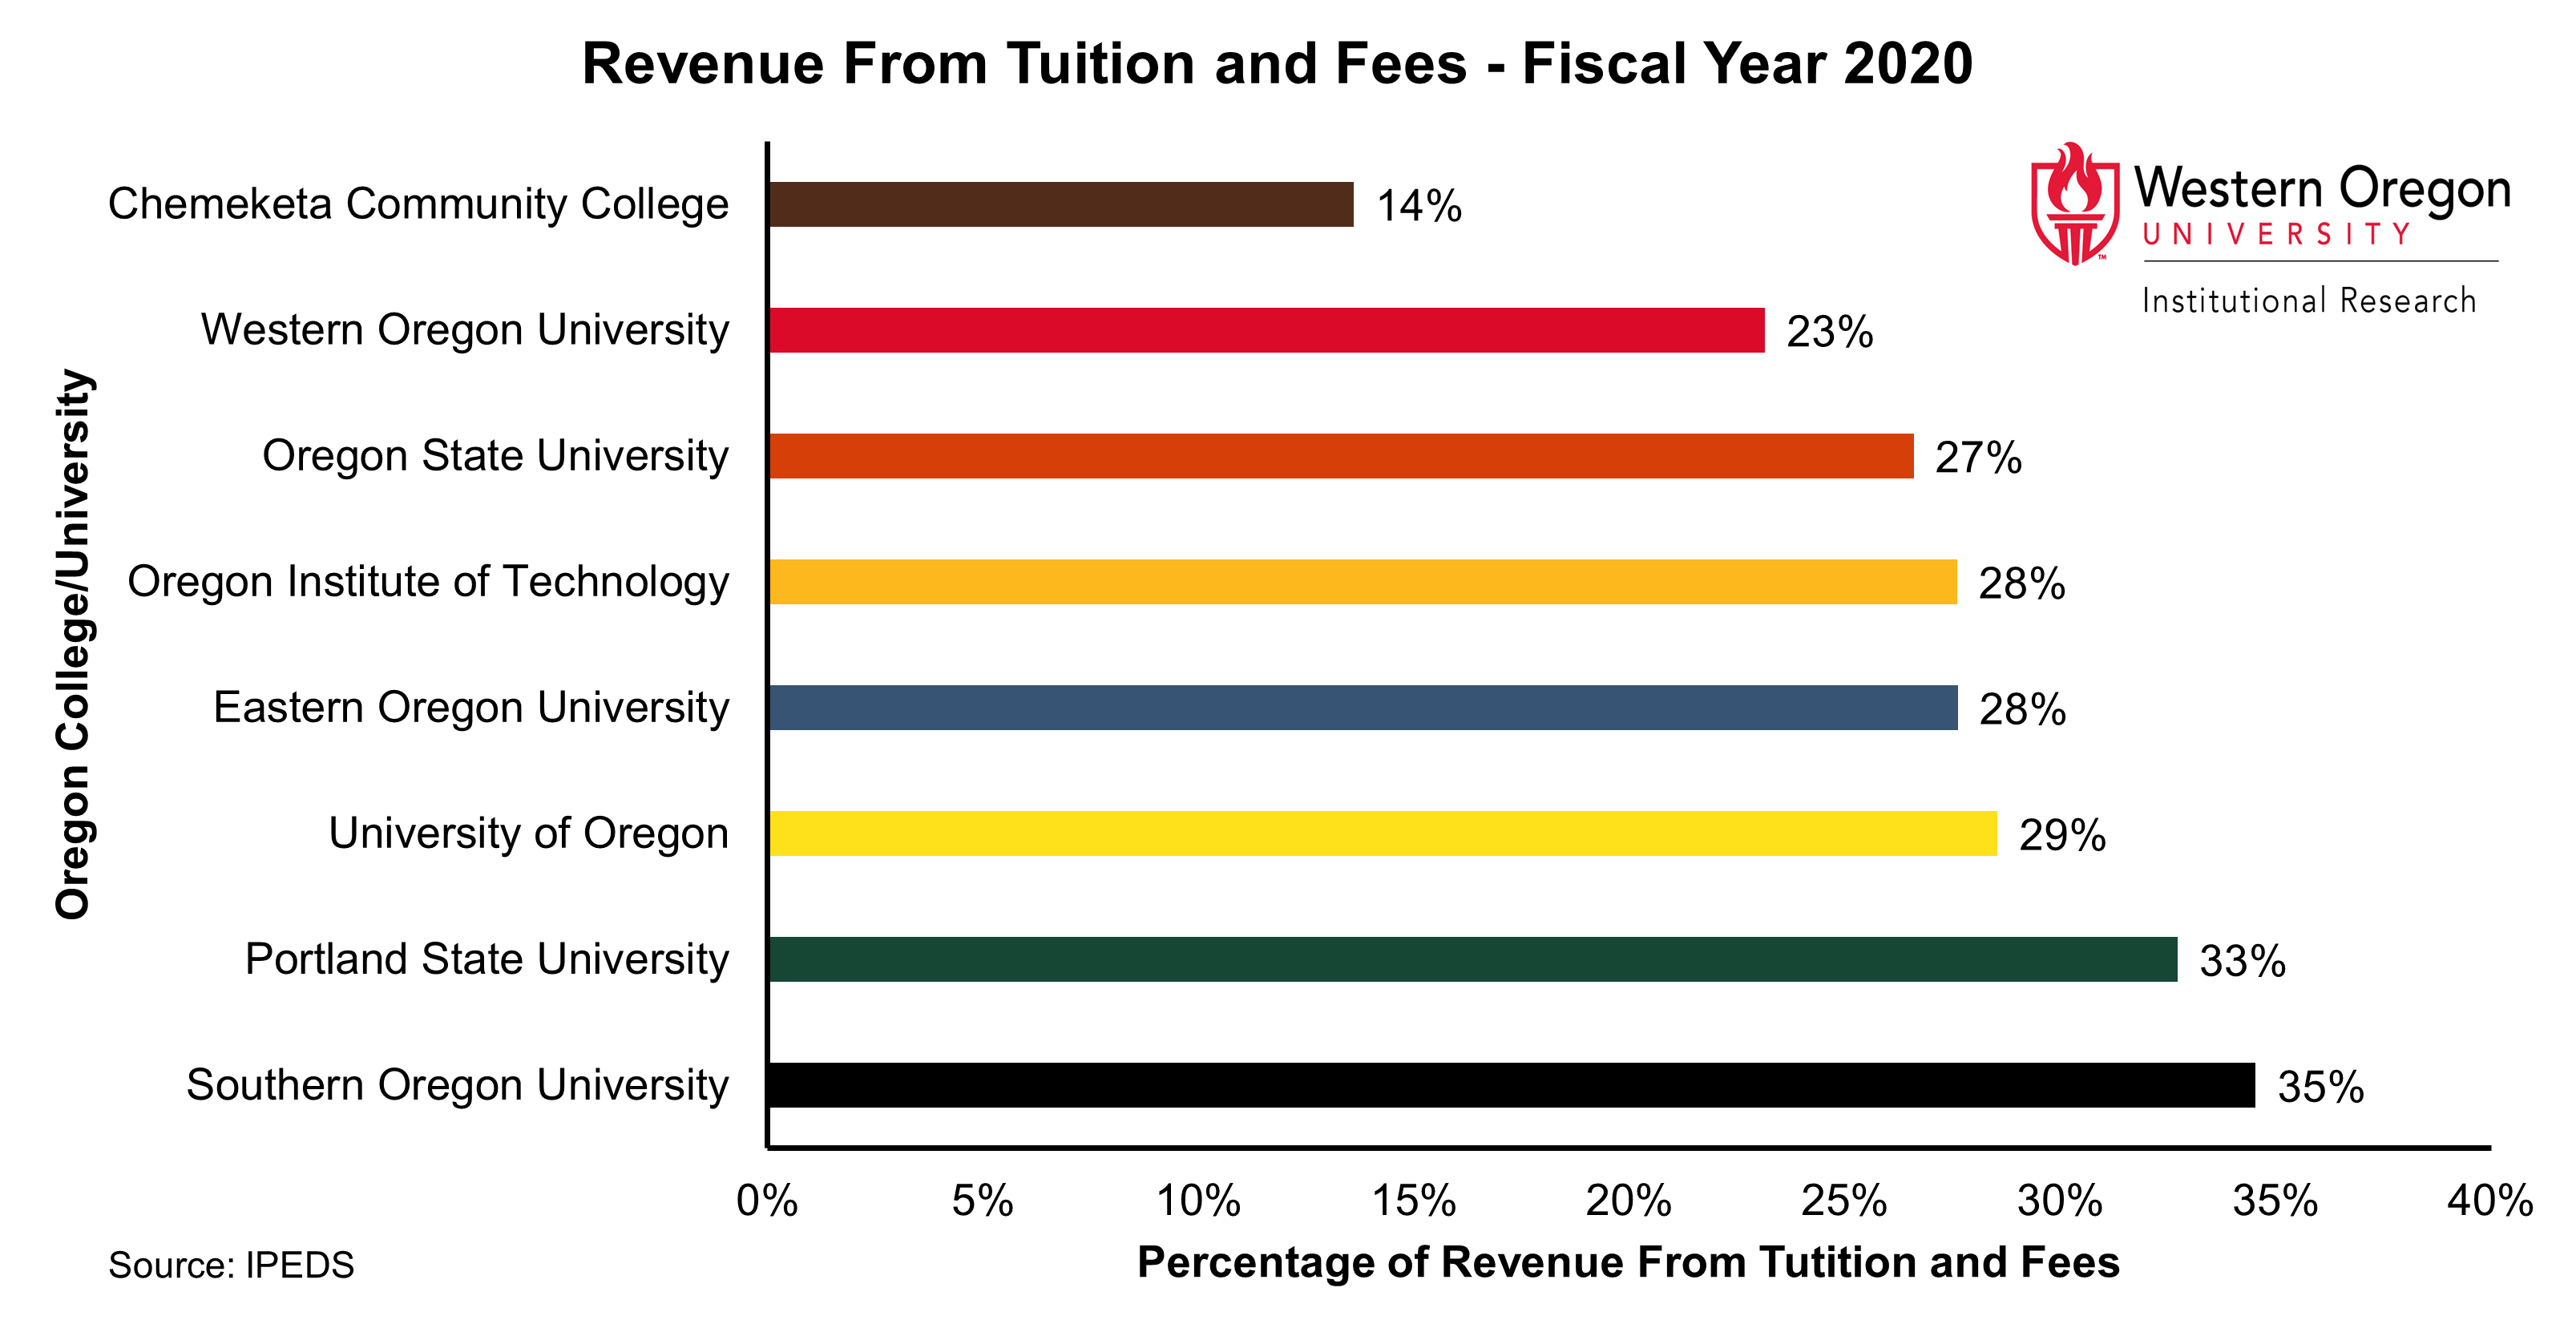 Bar graph of the percentage of revenue from tuition and fees for WOU and other Oregon Public Universities in 2020, showing percentages that range from 14% to 35% with WOU's percentage falling near the minimum